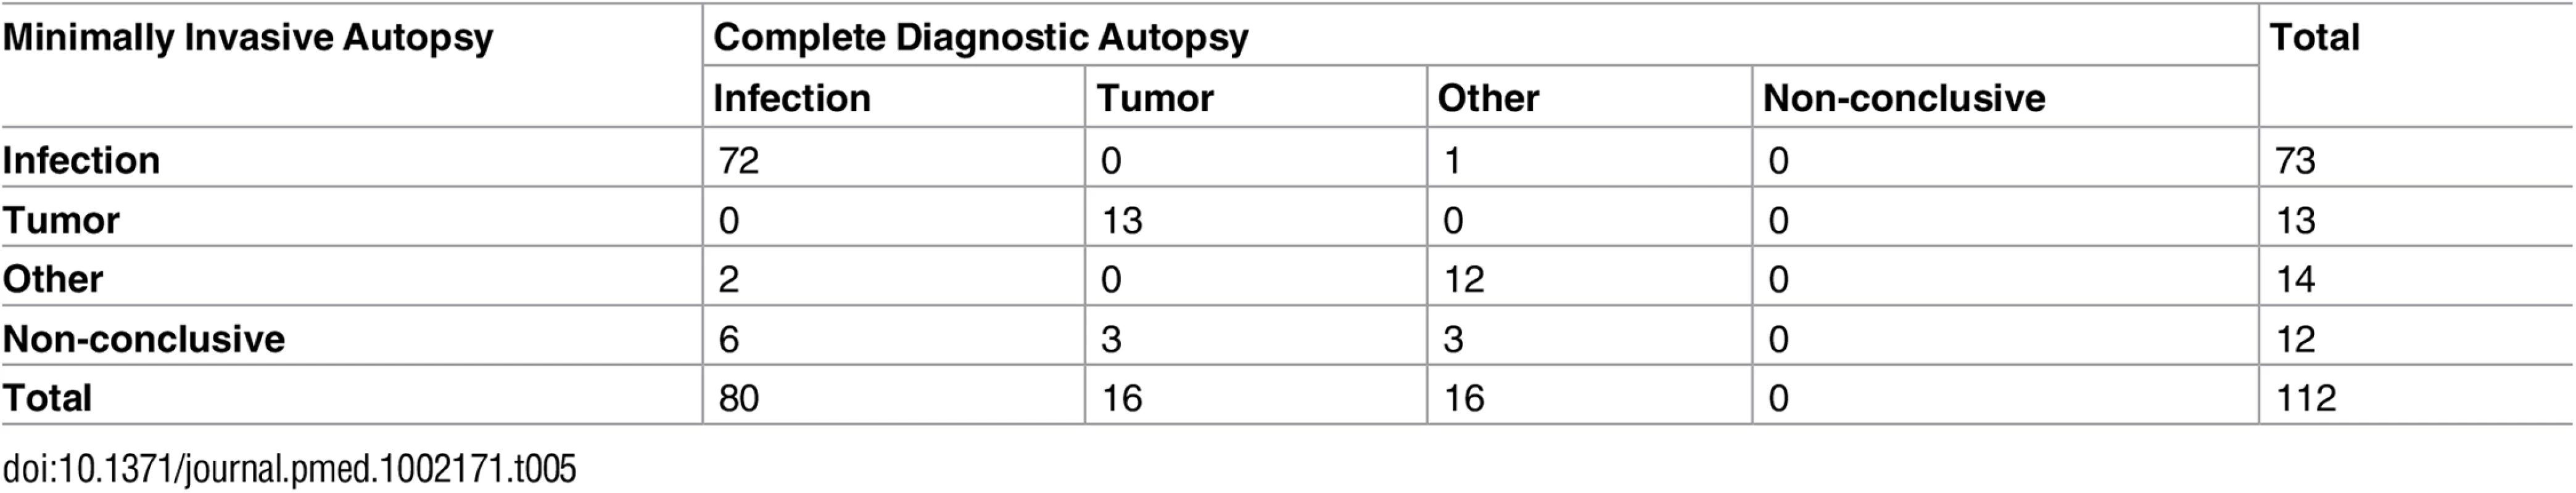 Correlation between the minimally invasive autopsy diagnosis and the complete diagnostic autopsy diagnosis of all cases, grouped according to the major disease categories.